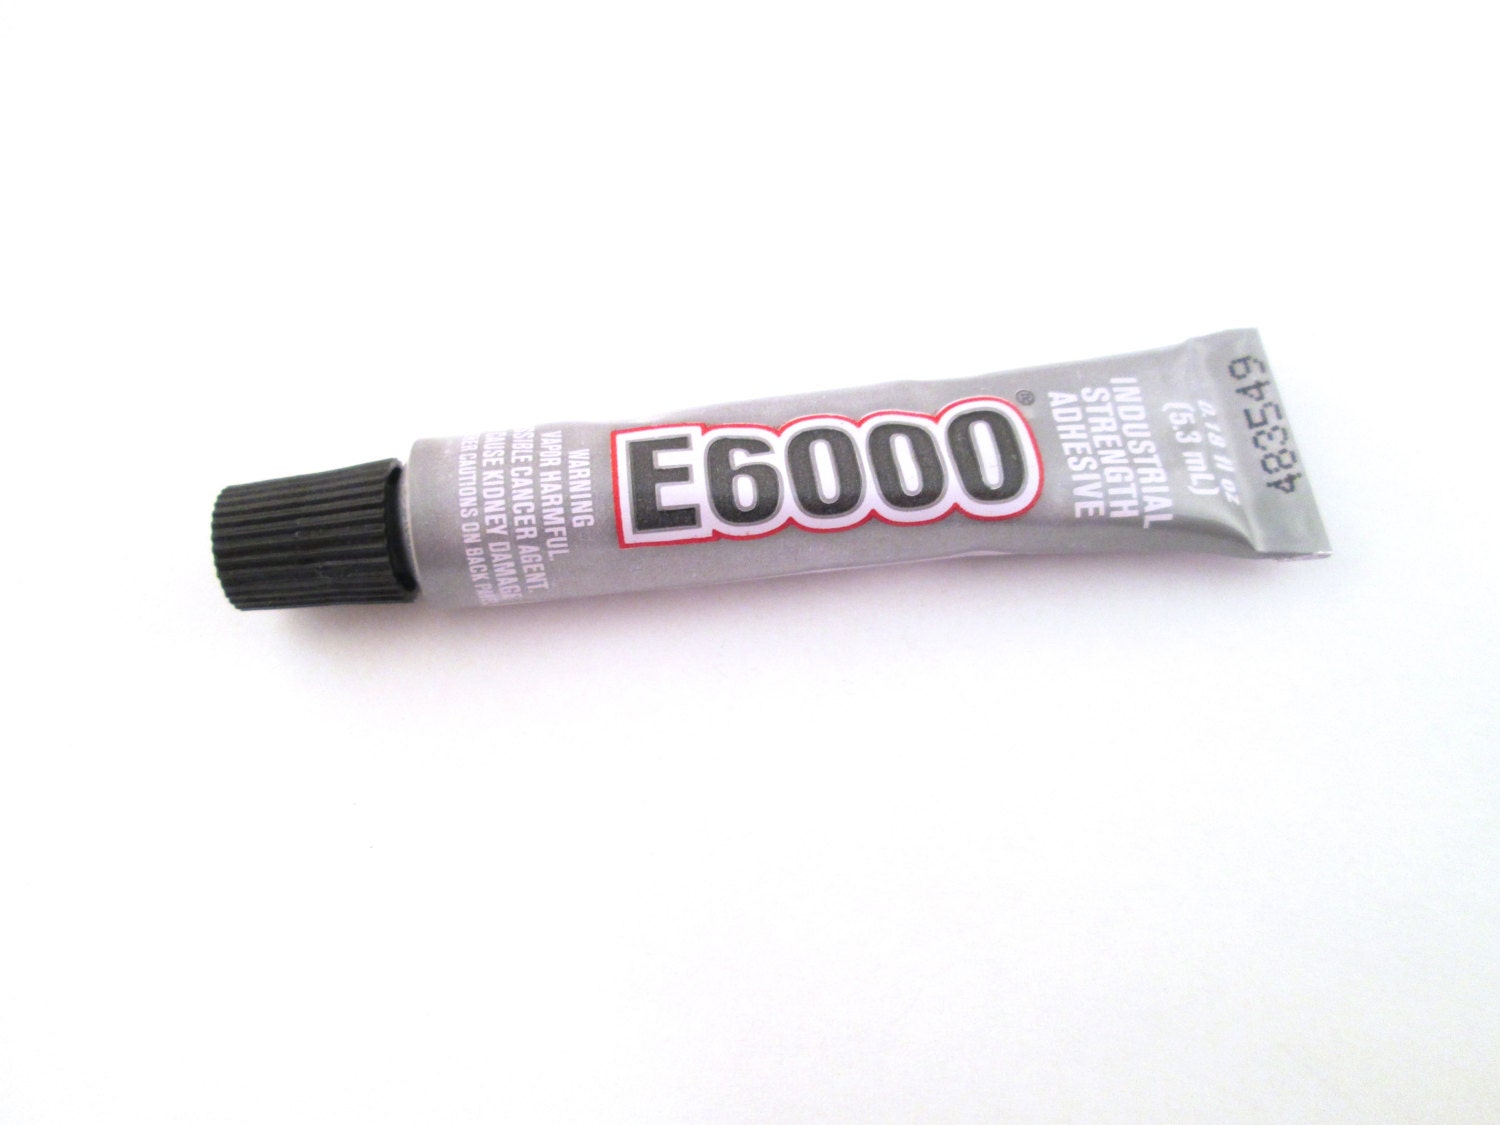 E6000 Jewelry And Bead Adhesive With 4 Precision Applicator Tips For  Jewelry! (Original Version)